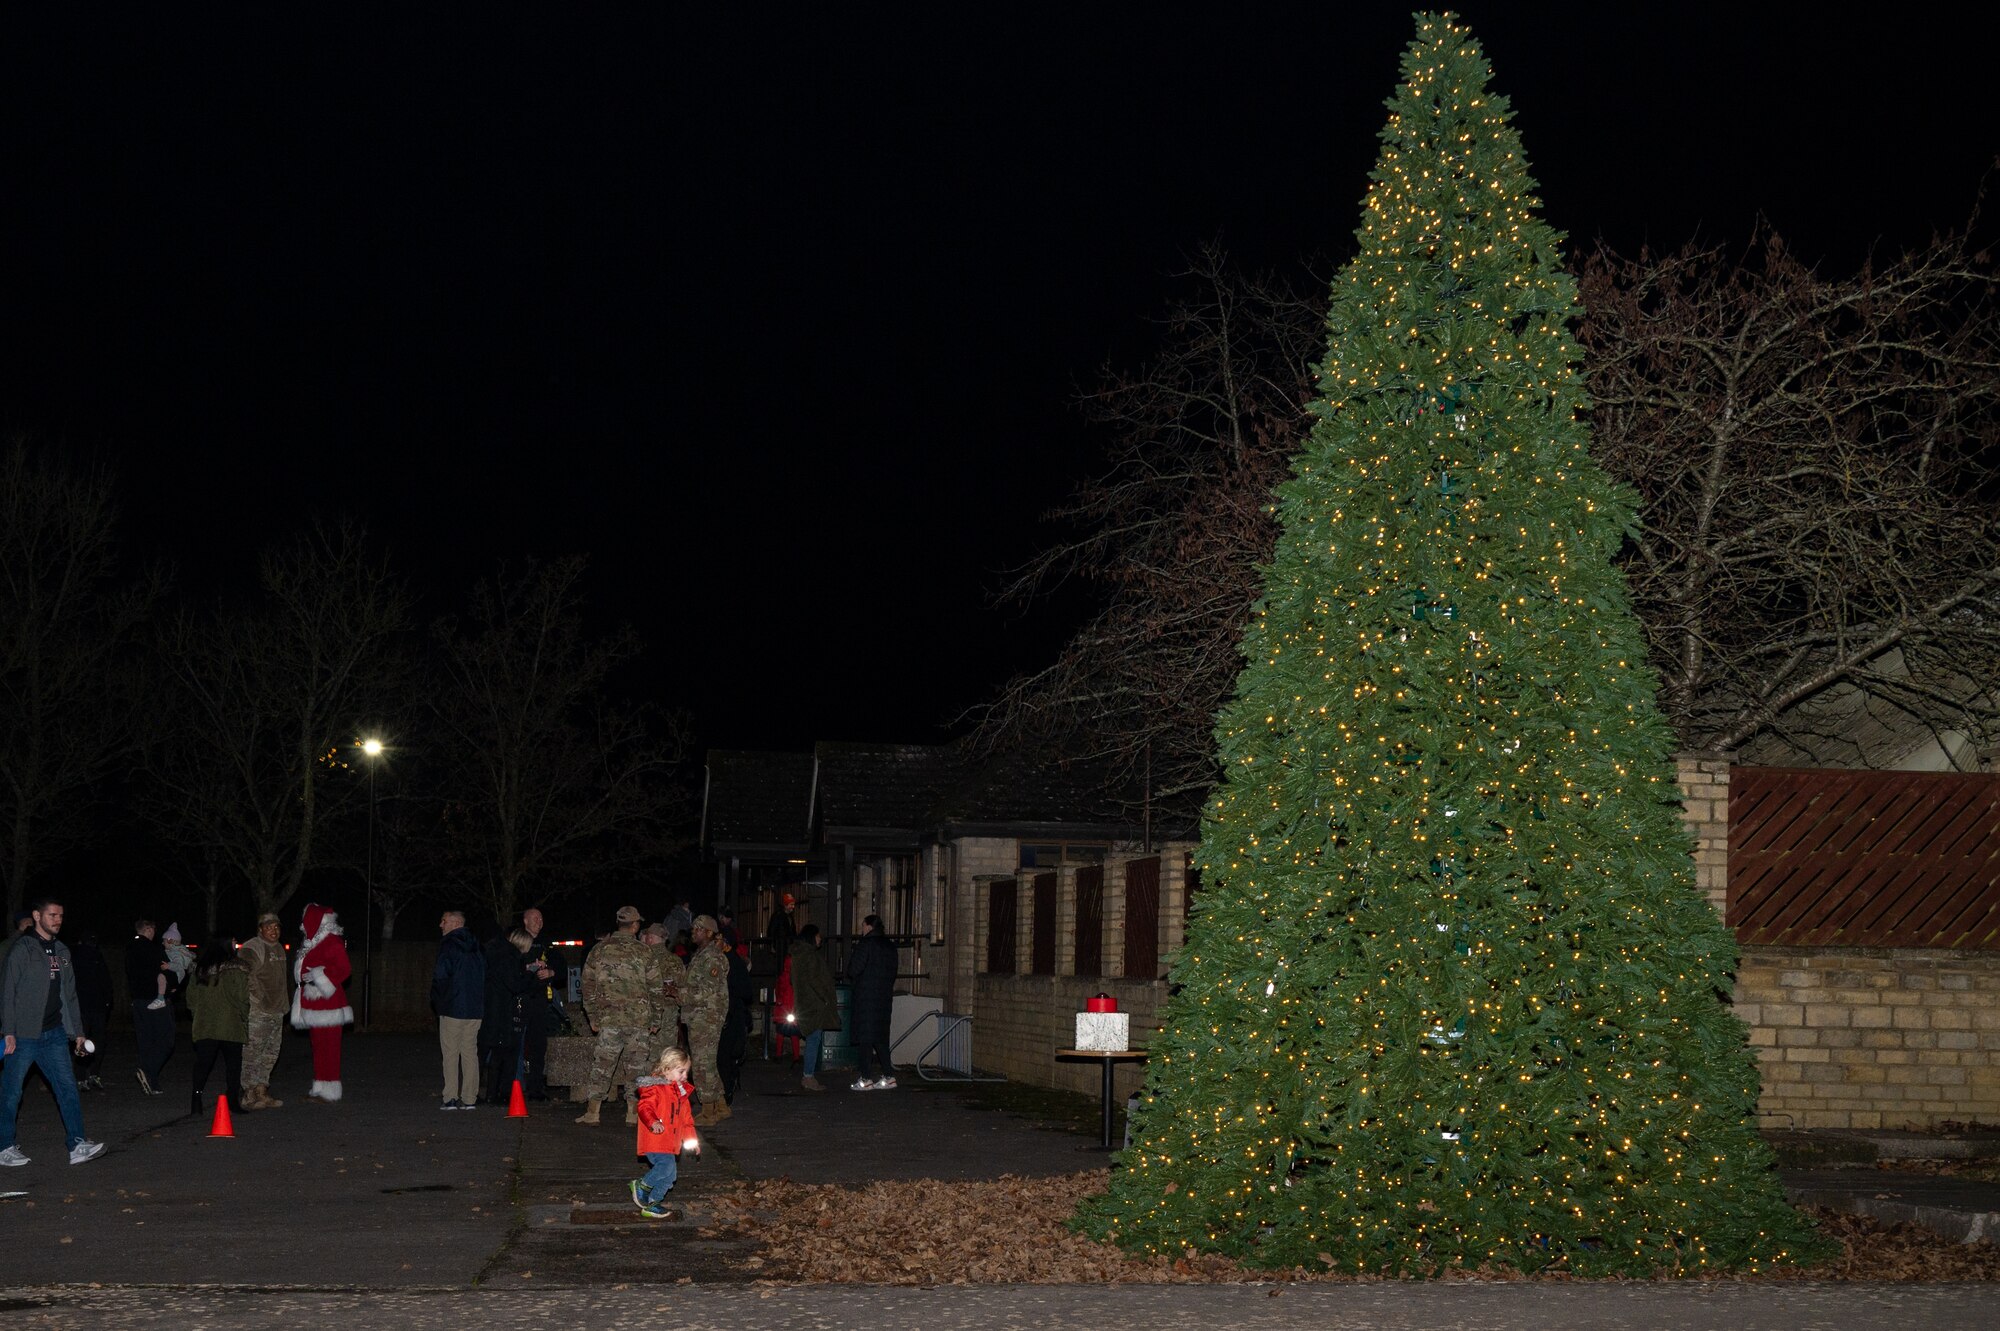 Community members gather after a tree lighting ceremony.